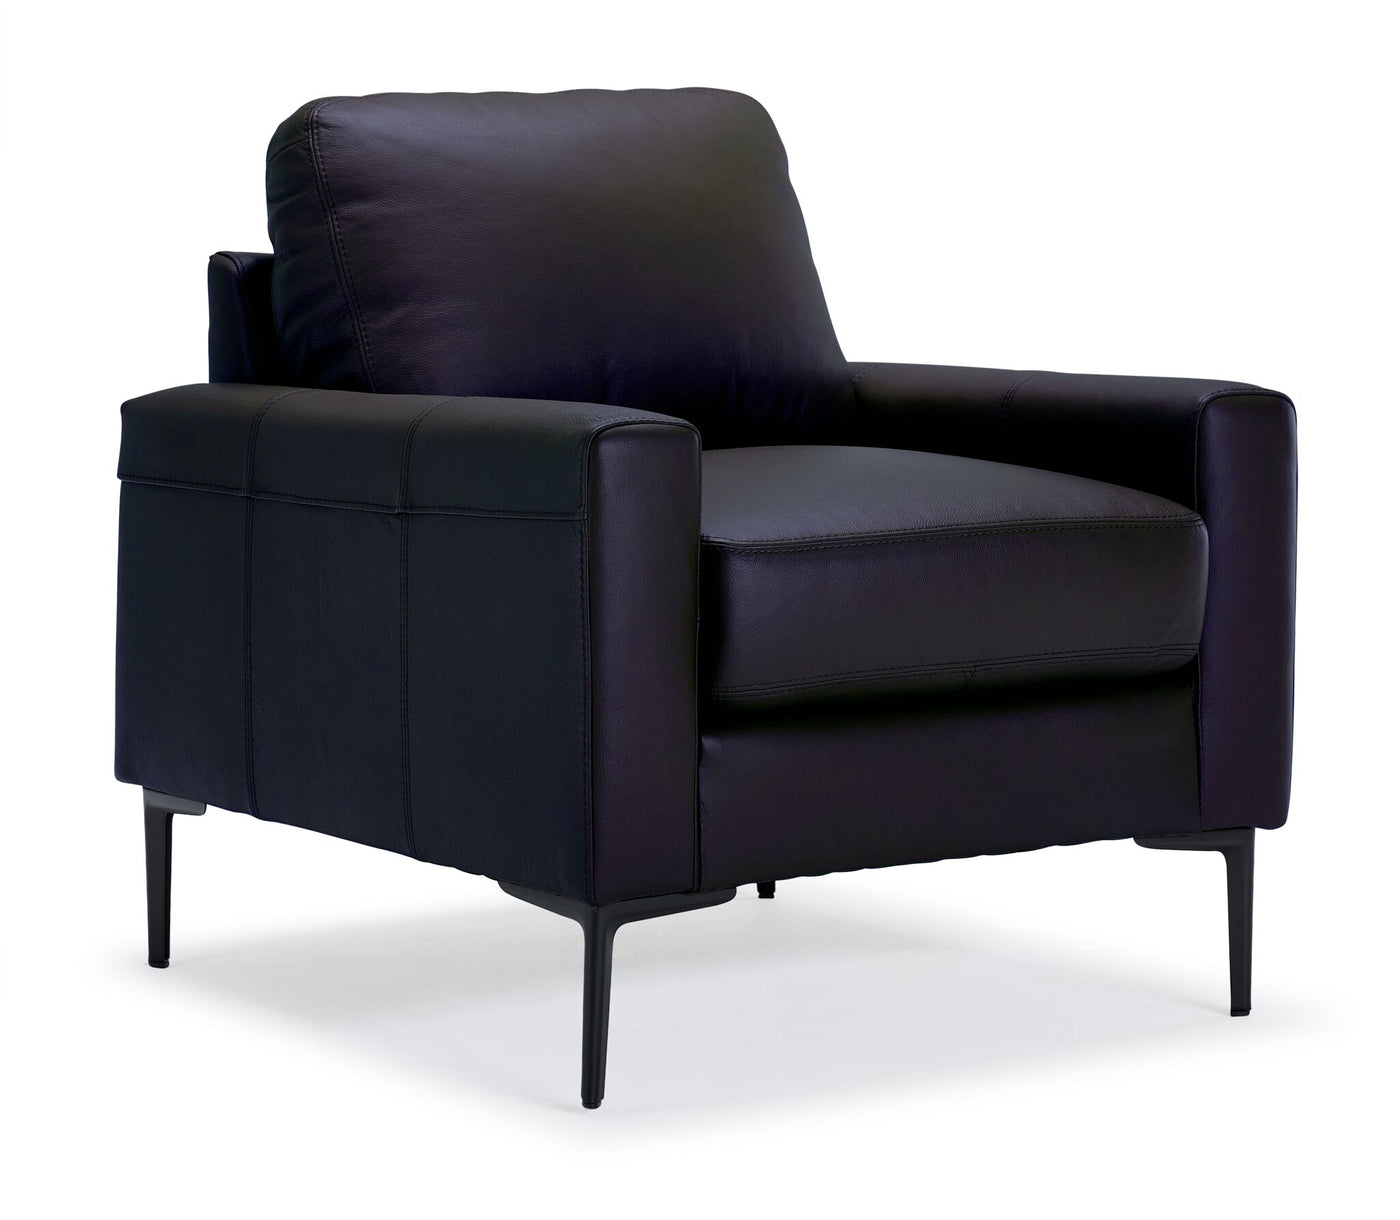 Chito Leather Sofa and Chair Set - Raven